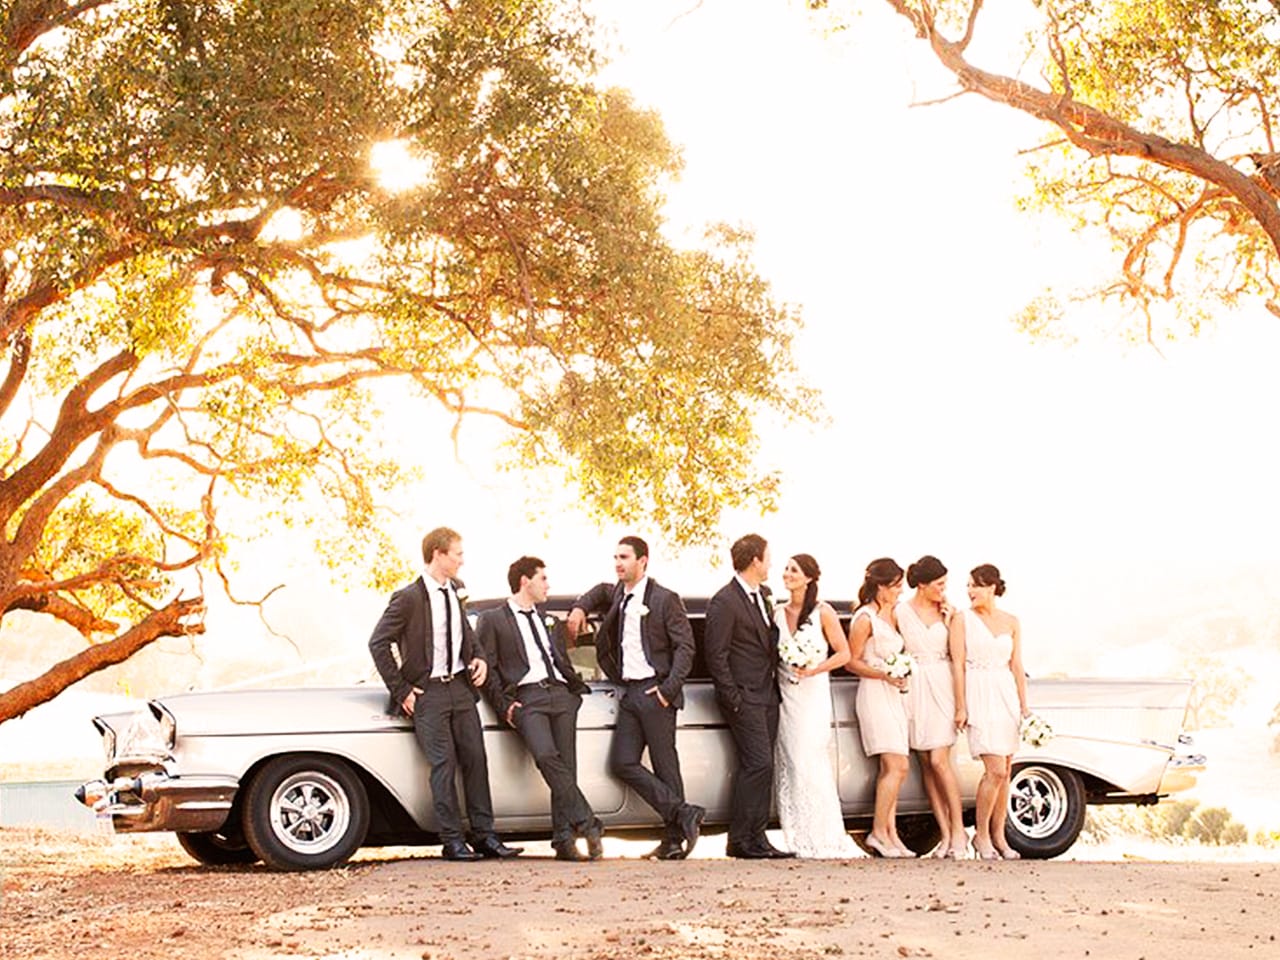 Bride And Groom With The Entourage Taking Photo Under The Trees With A Vintage Car Behind Them